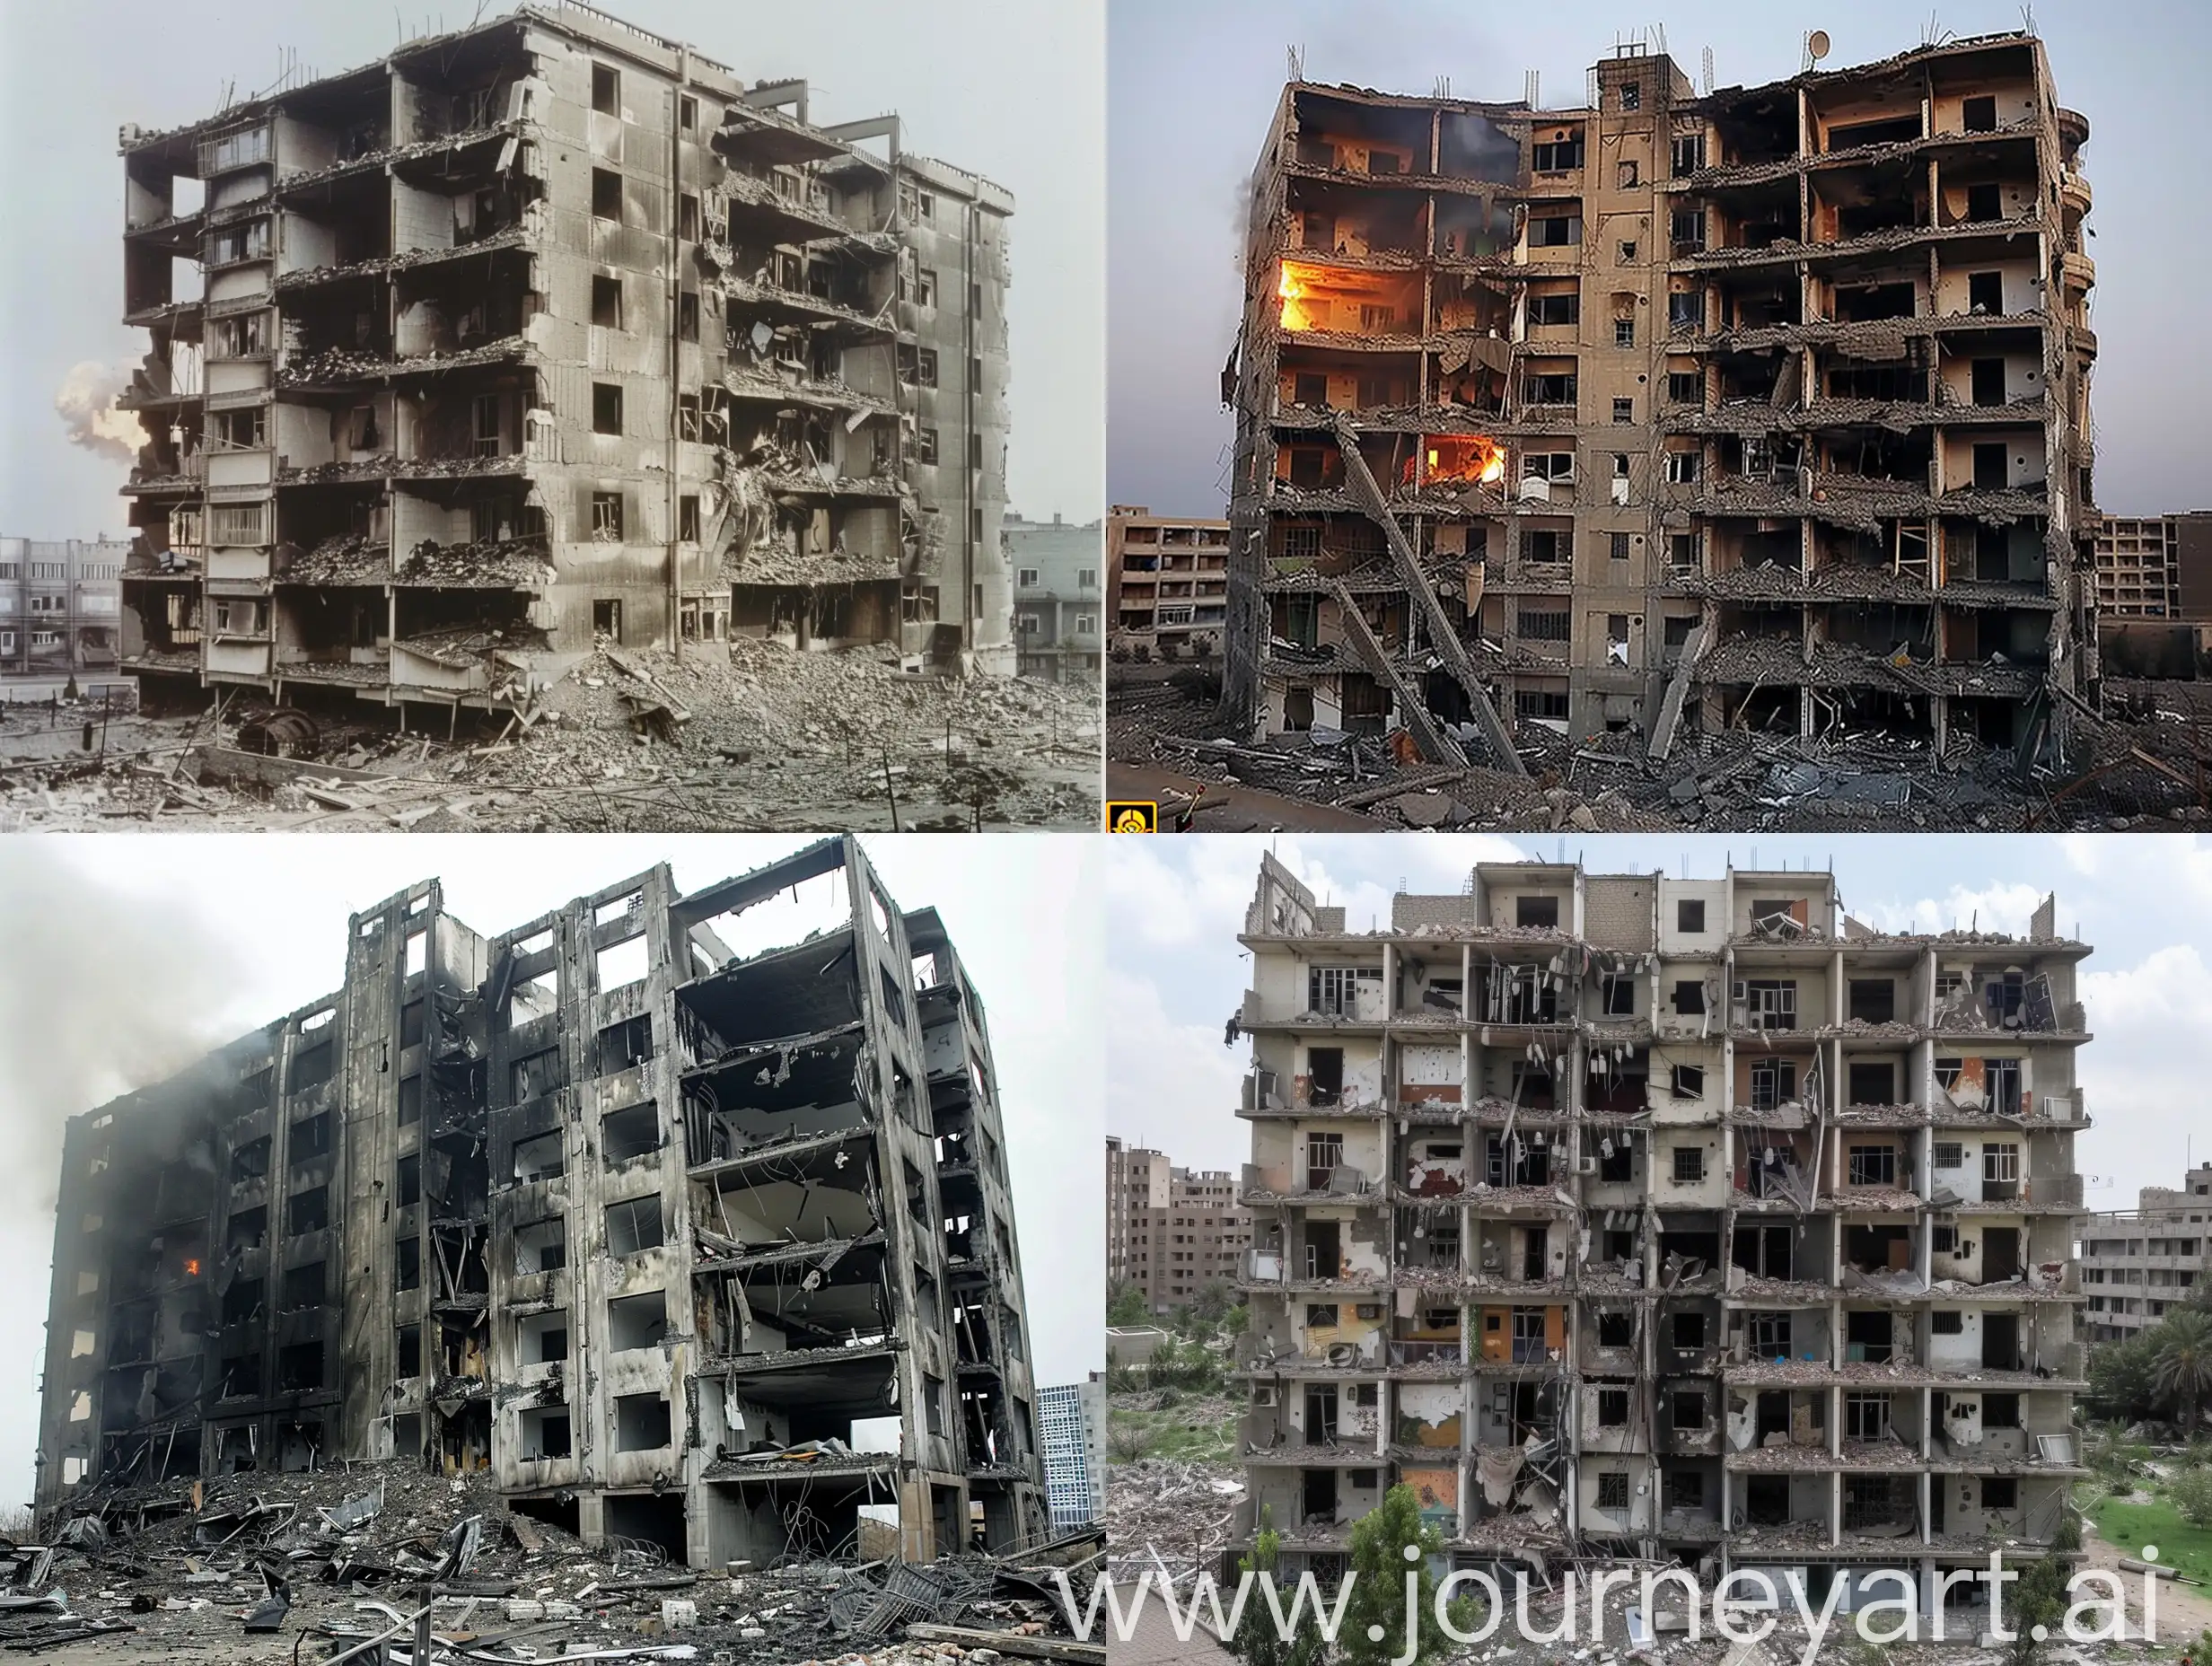 Devastation-of-a-FiveStory-Residential-Building-Consequences-of-Bombings-and-Fires